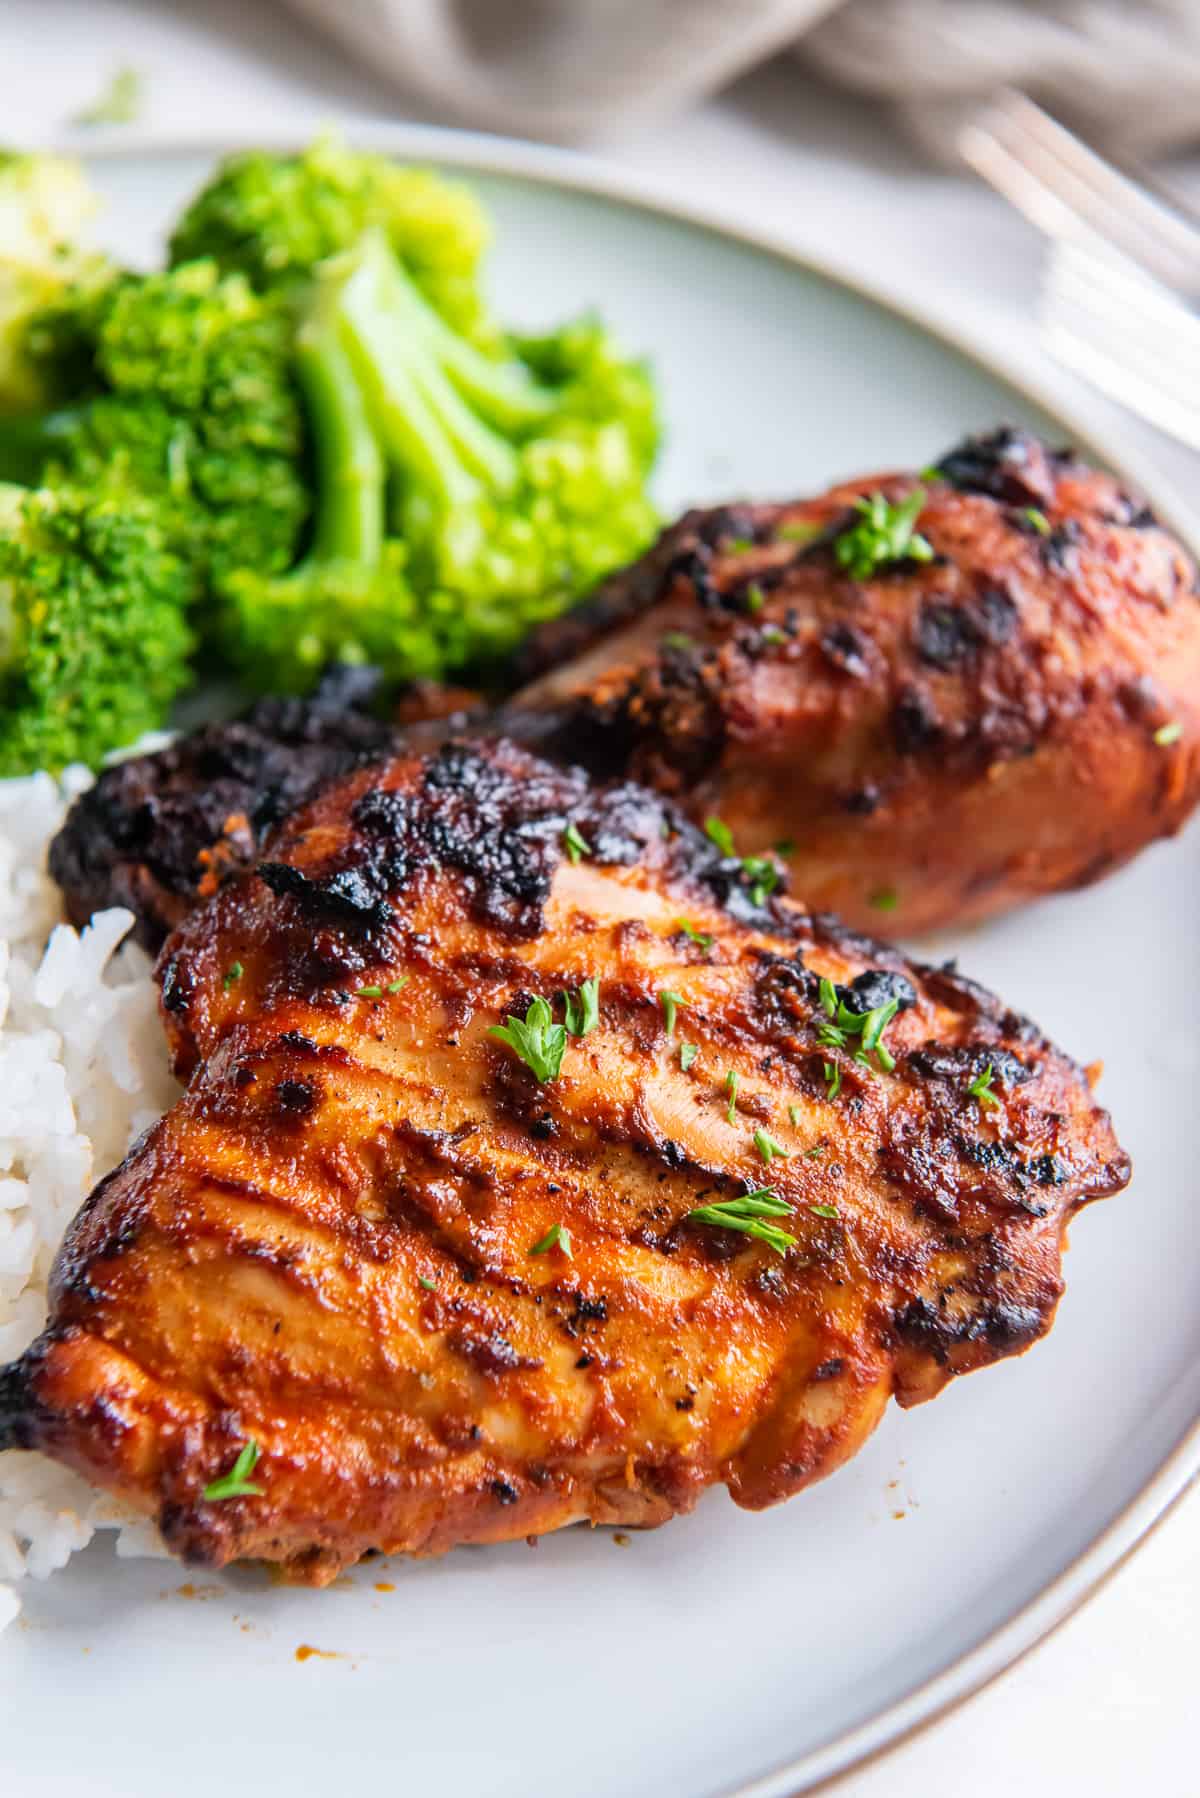 Grilled paprika chicken on a white plate with rice and broccoli.